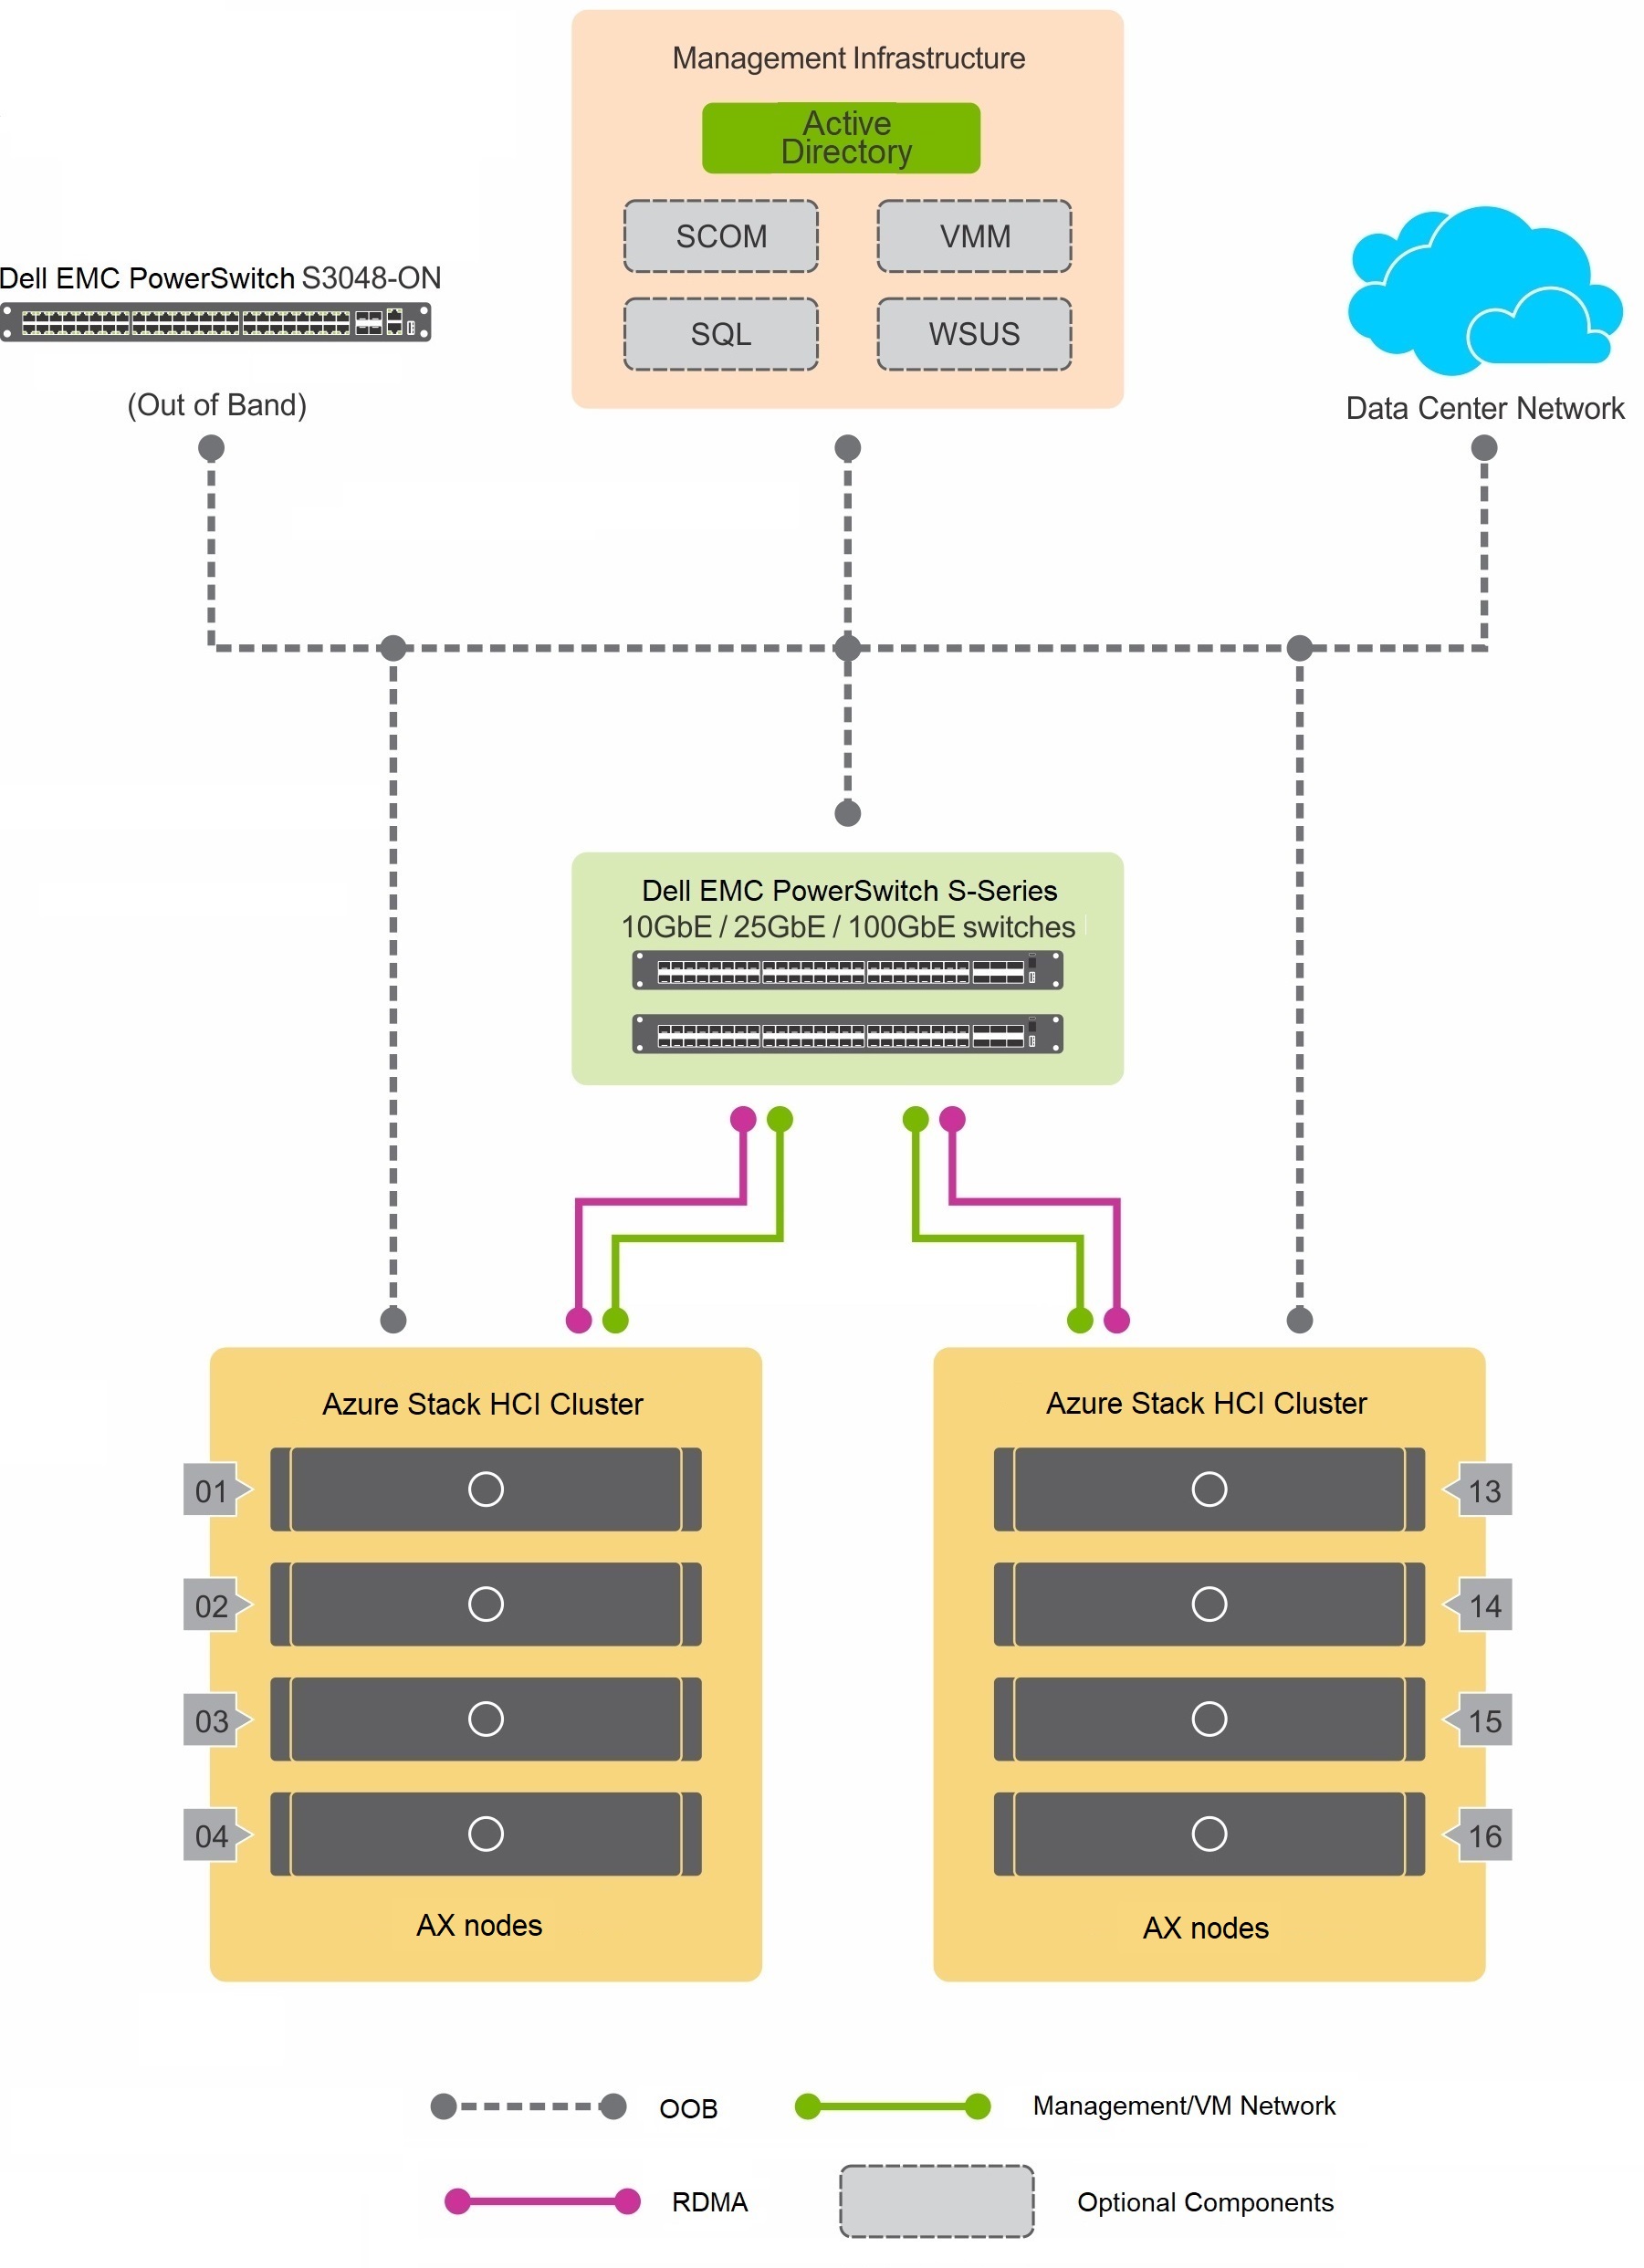 Image of Hyperconverged virtualized solution using AX nodes